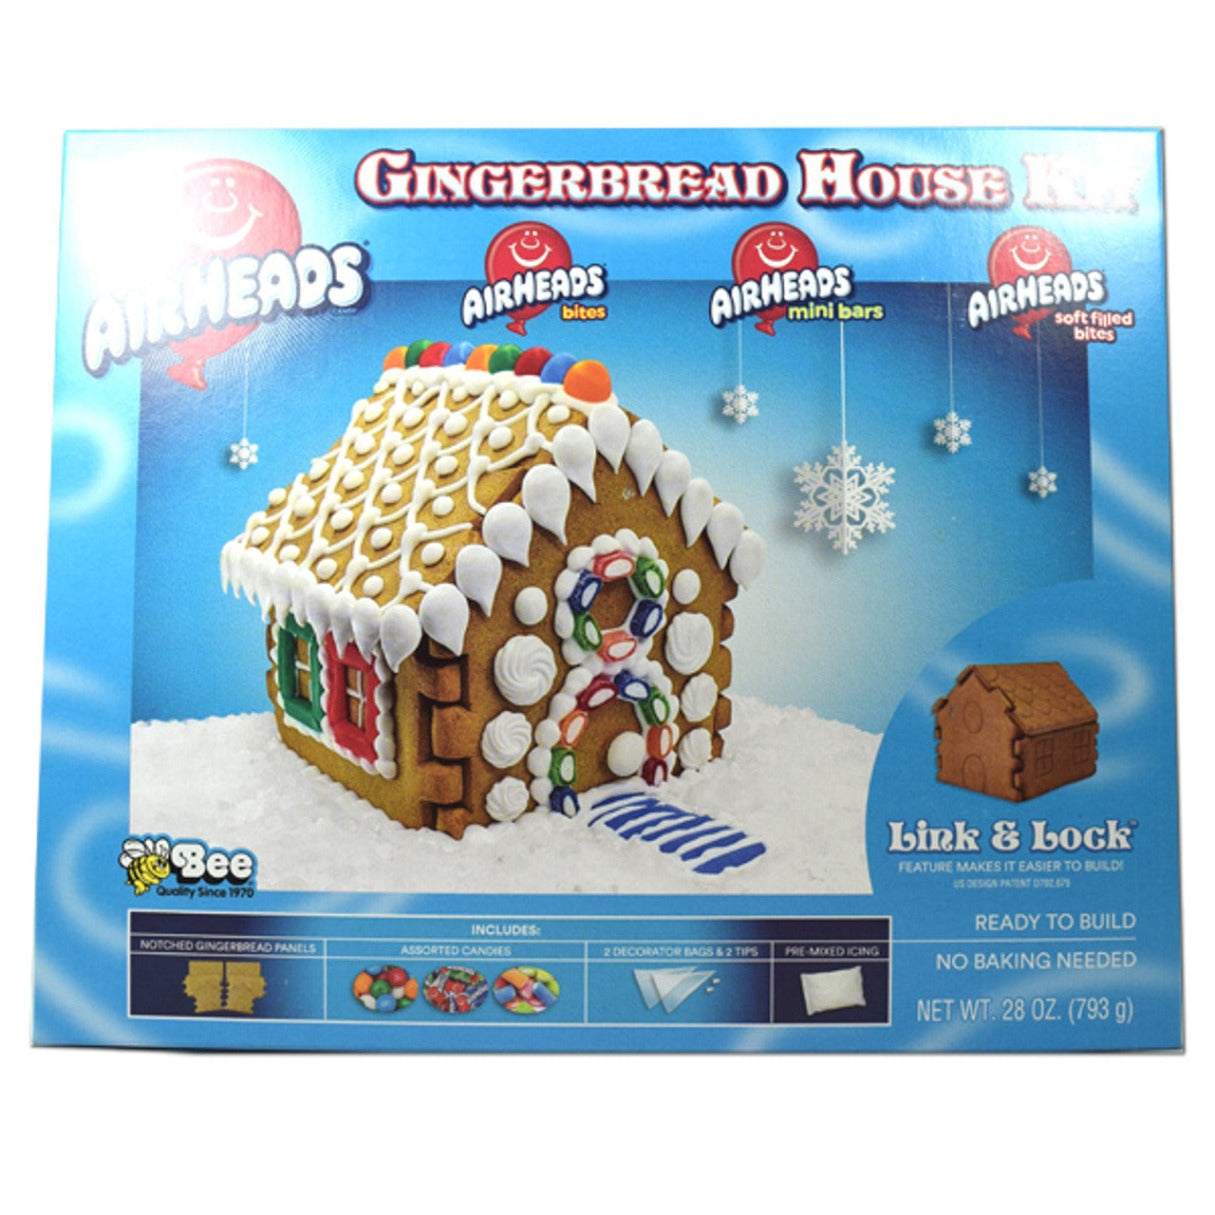 Ready-to-Build Gingerbread House Kit - 28oz